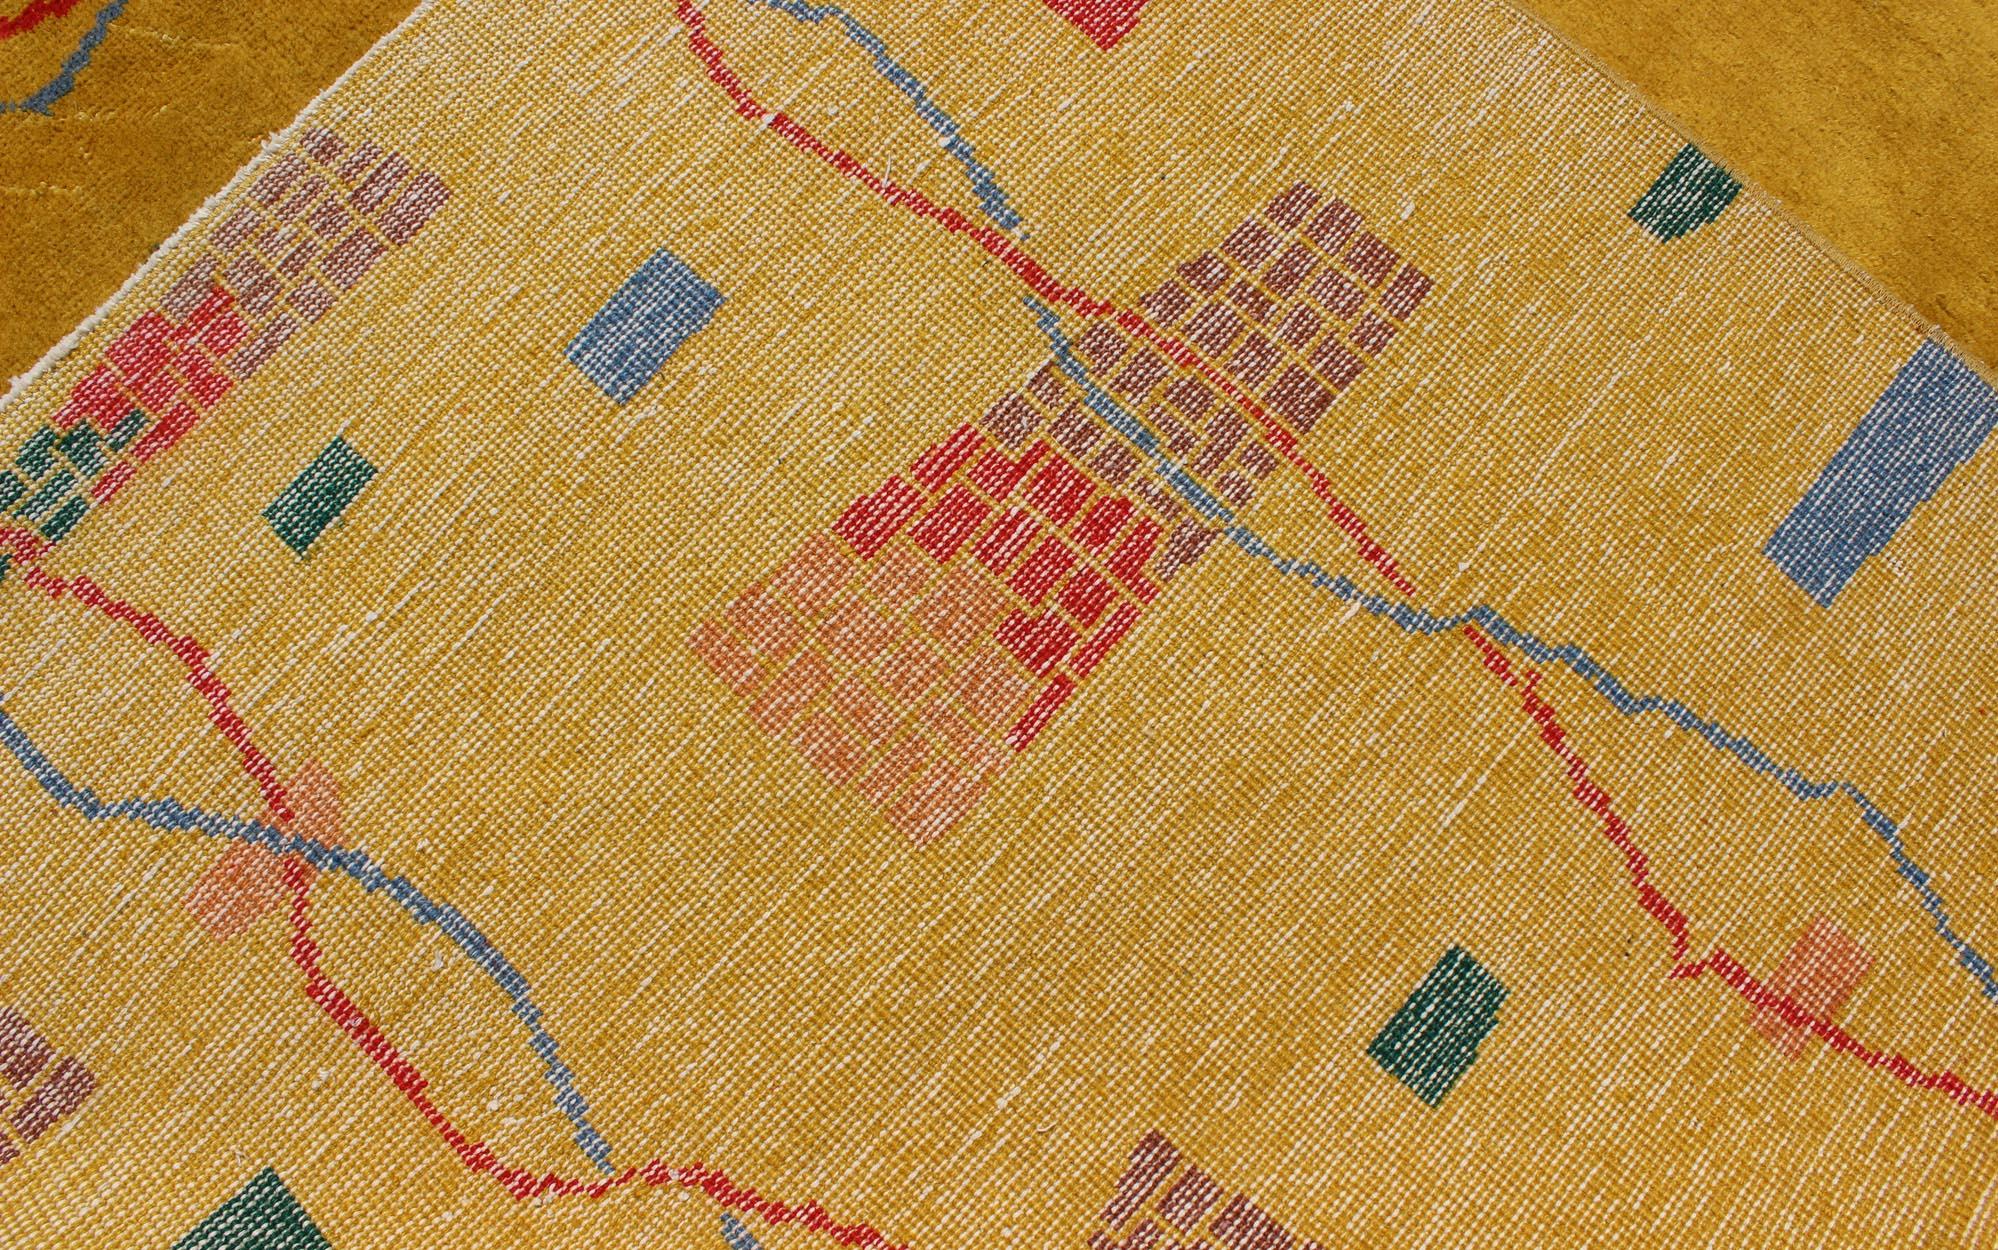 Mid-Century Modern Rug, Turkish Carpet in Bright Yellow, Red, Blue, Green & Pink For Sale 5